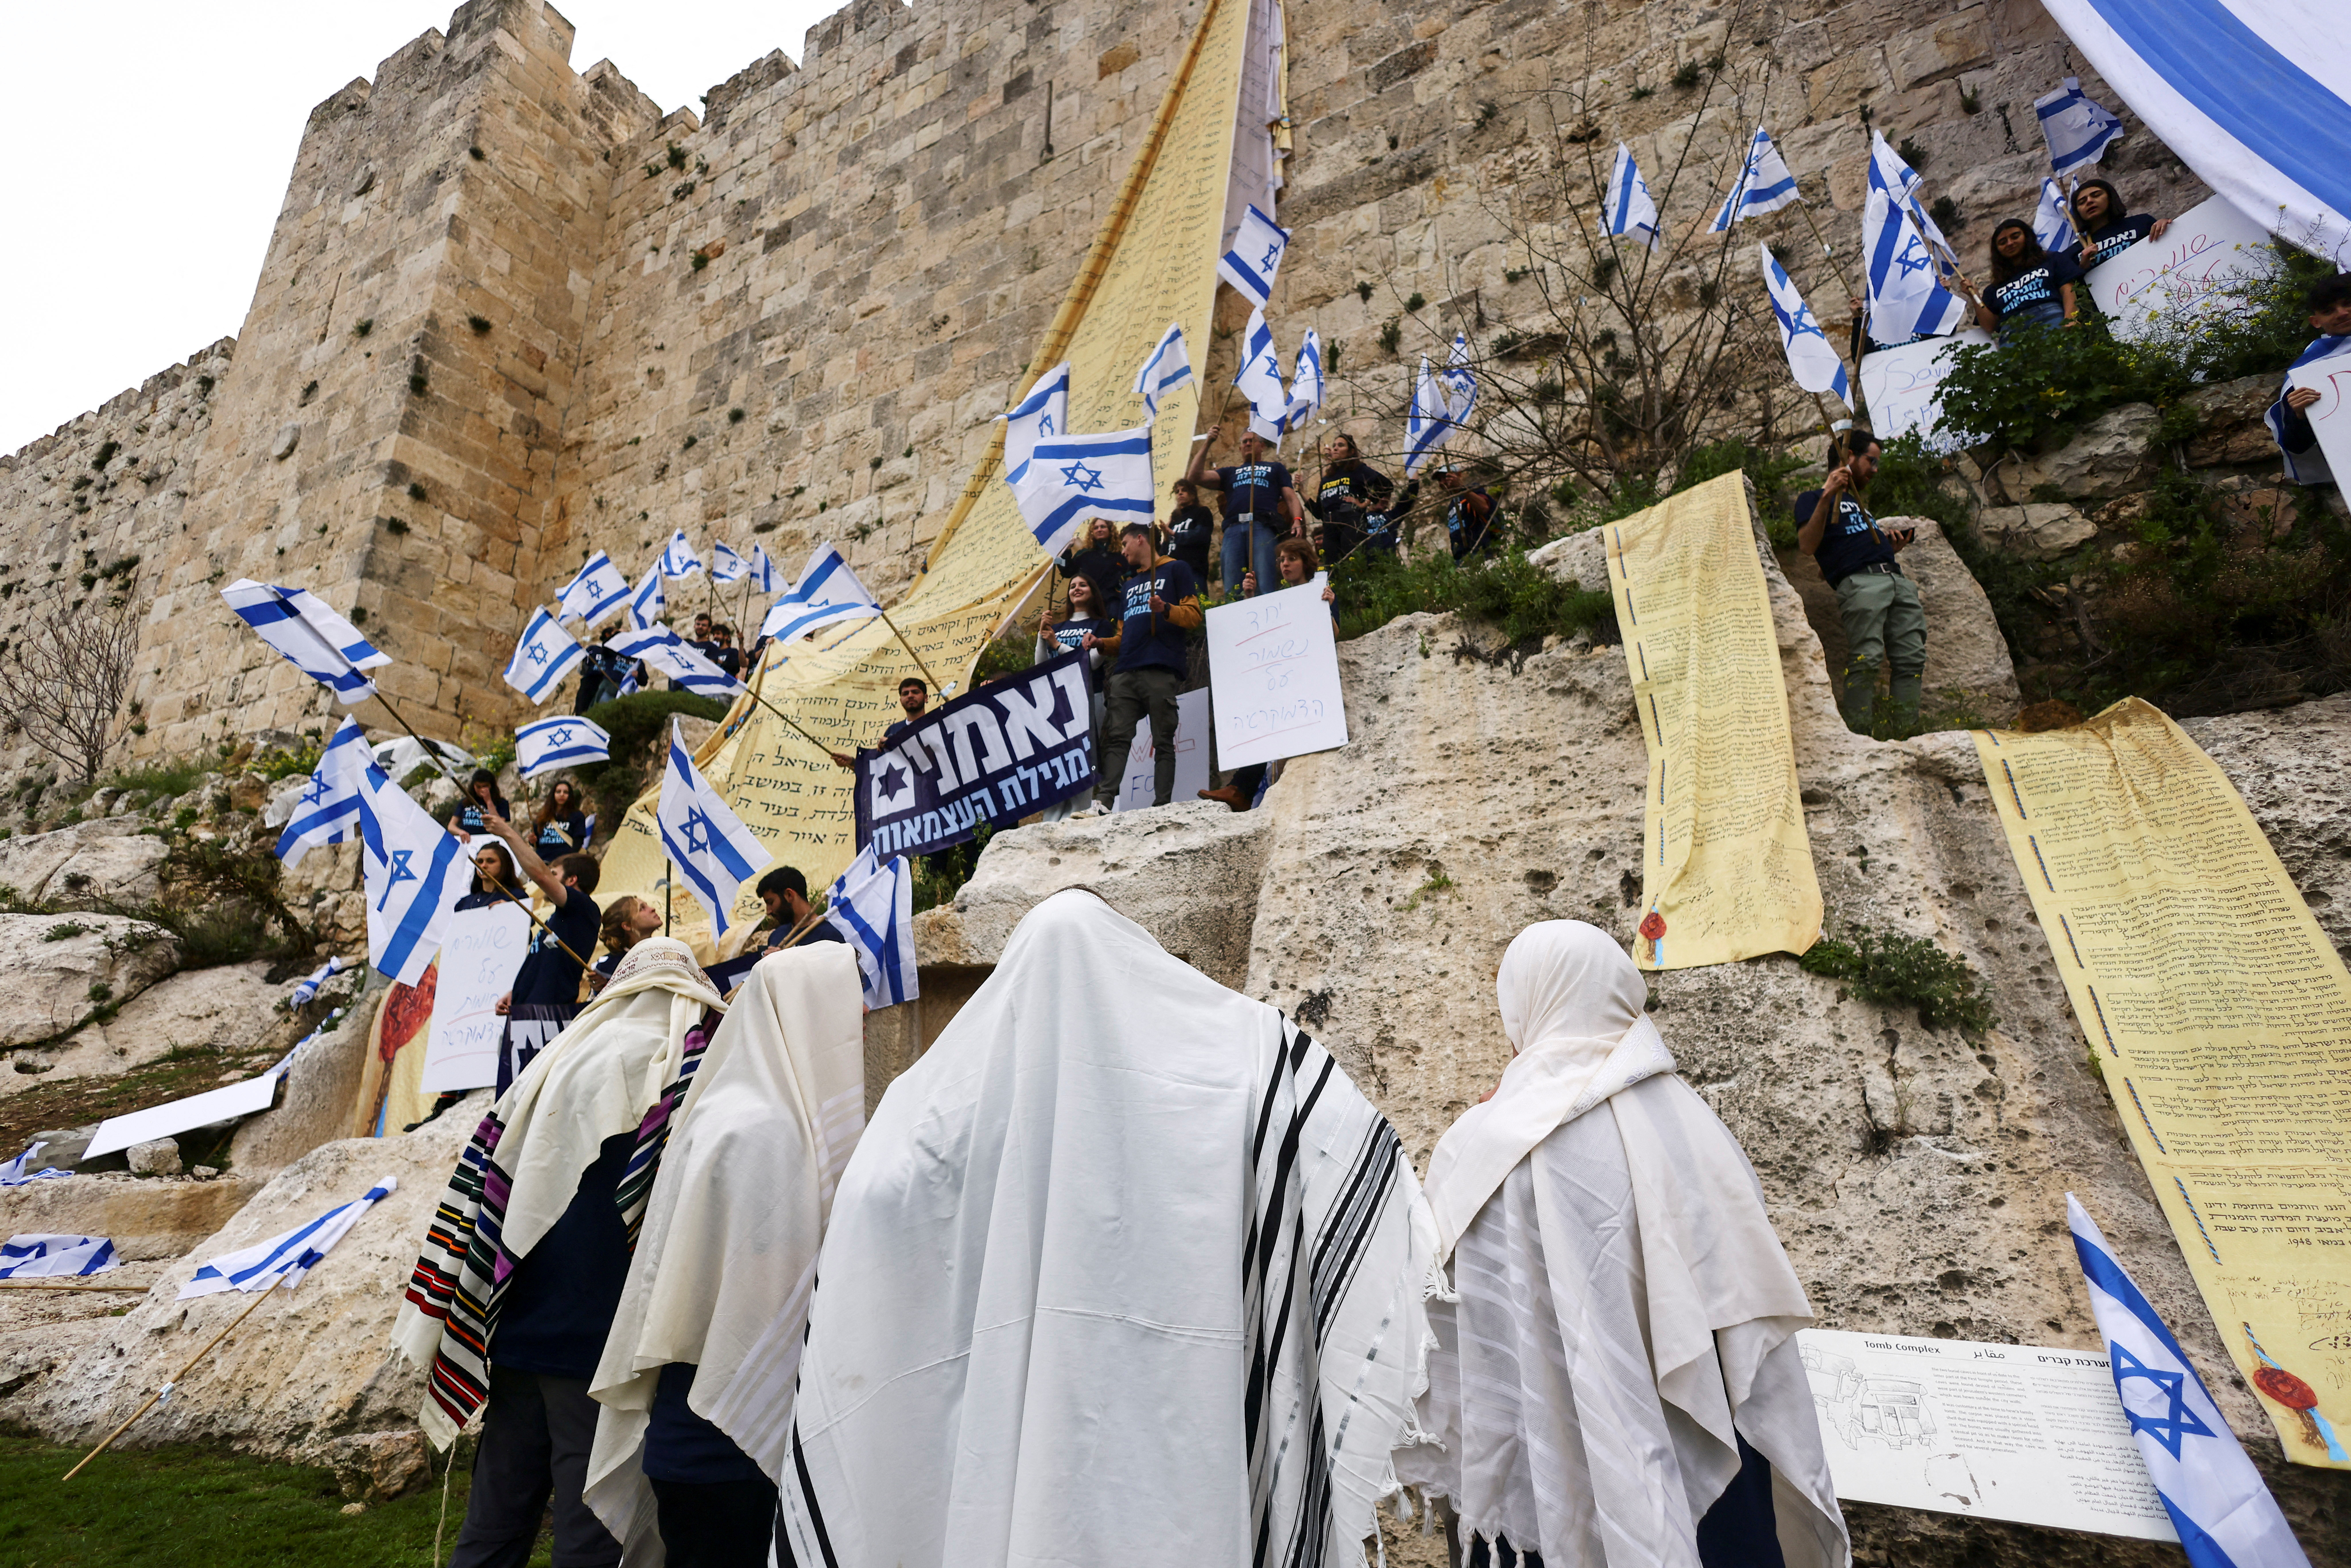 Demonstrators hang flags on the walls of Jerusalem's Old City in an act of protest as Israelis launch 